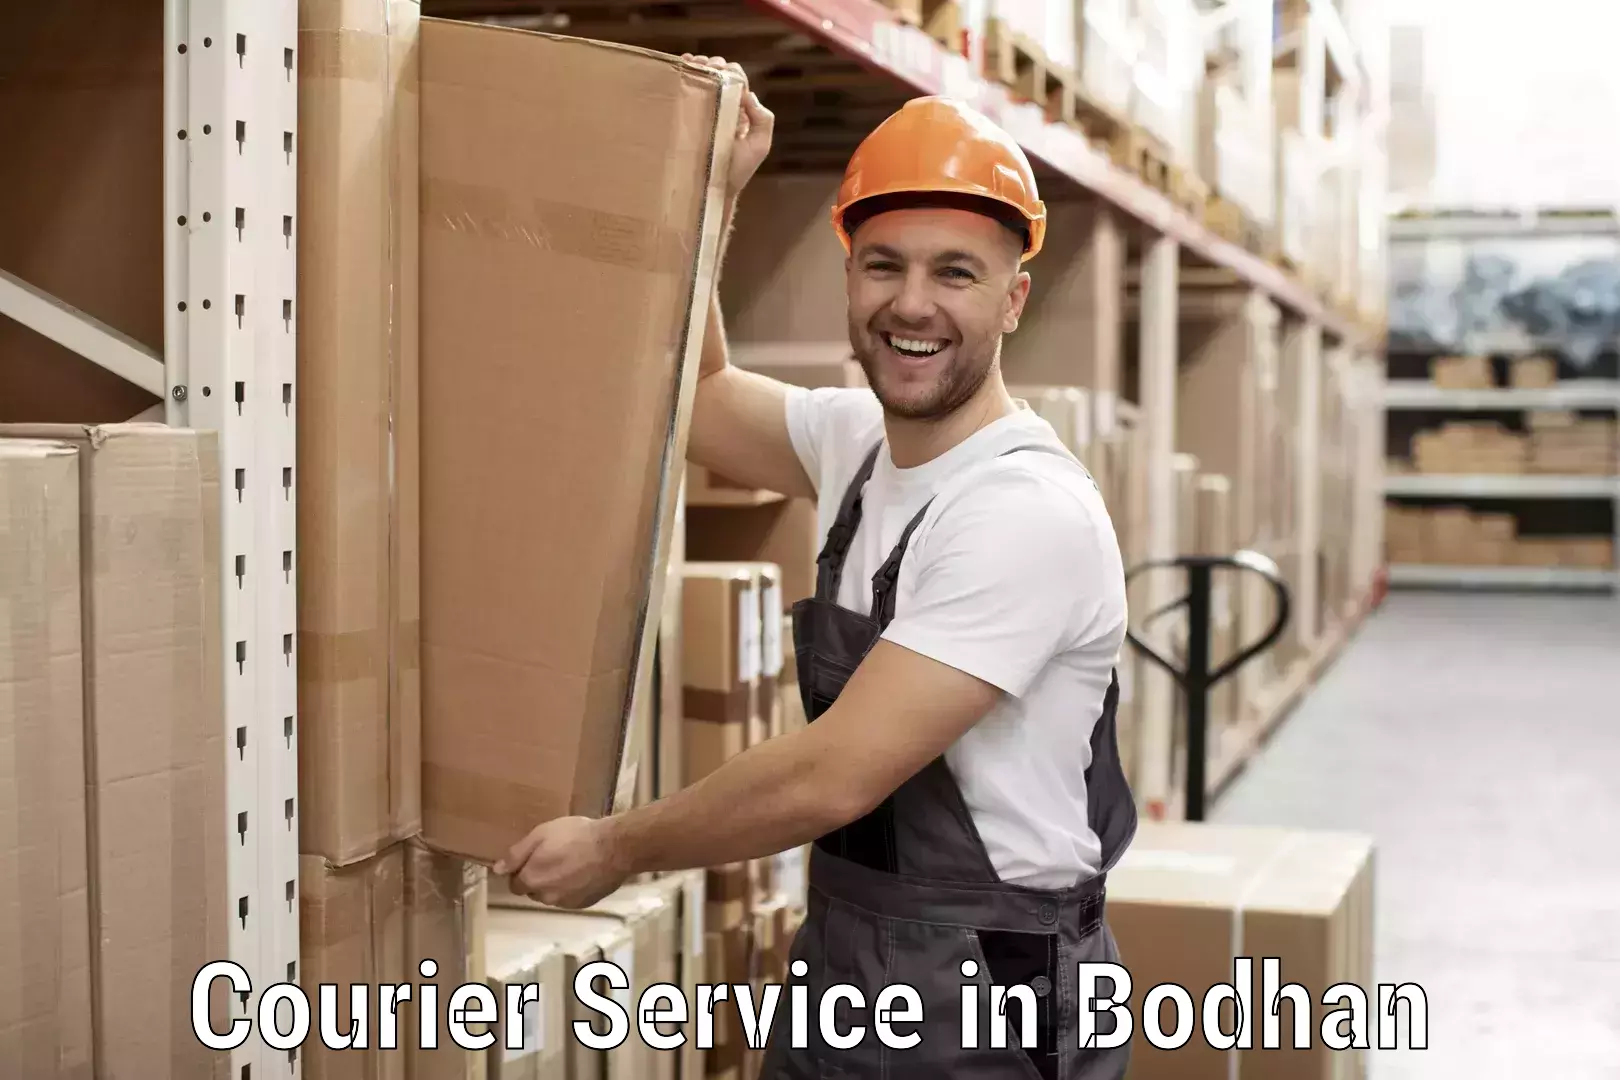 Multi-service courier options in Bodhan